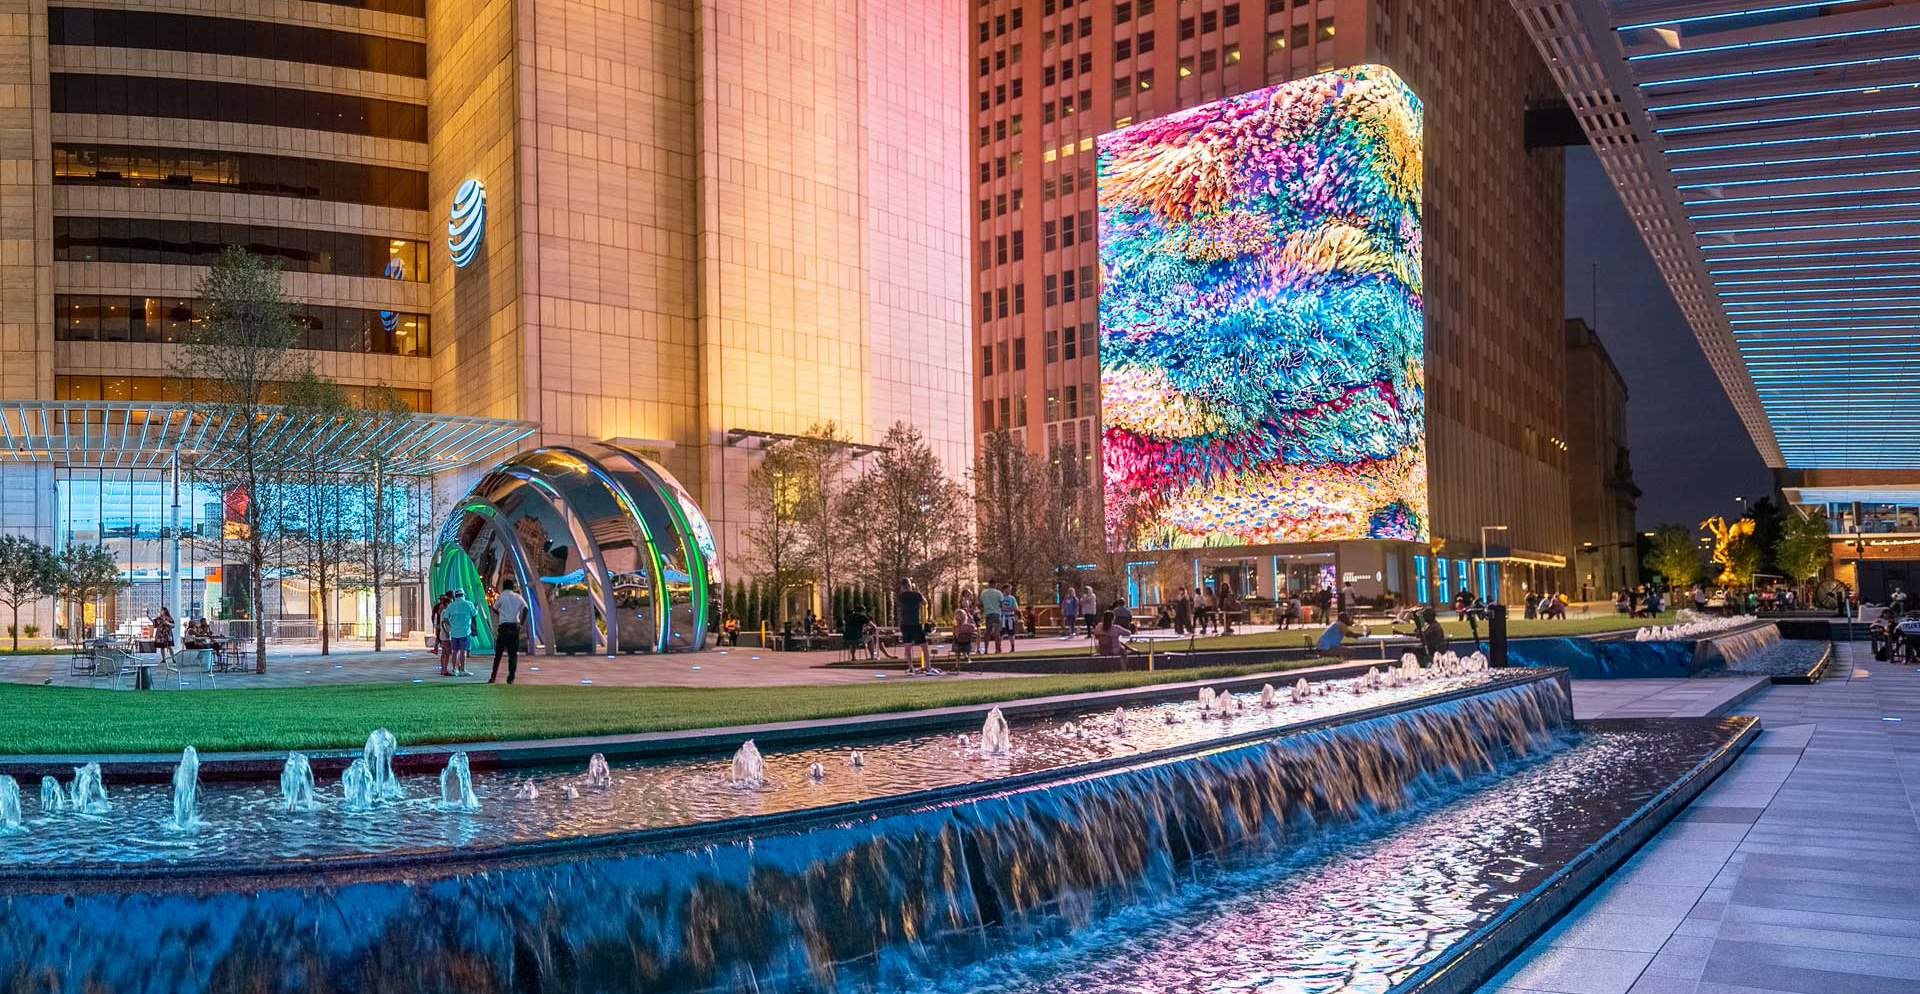 A large building with a large colorful glass fountain in front of it.